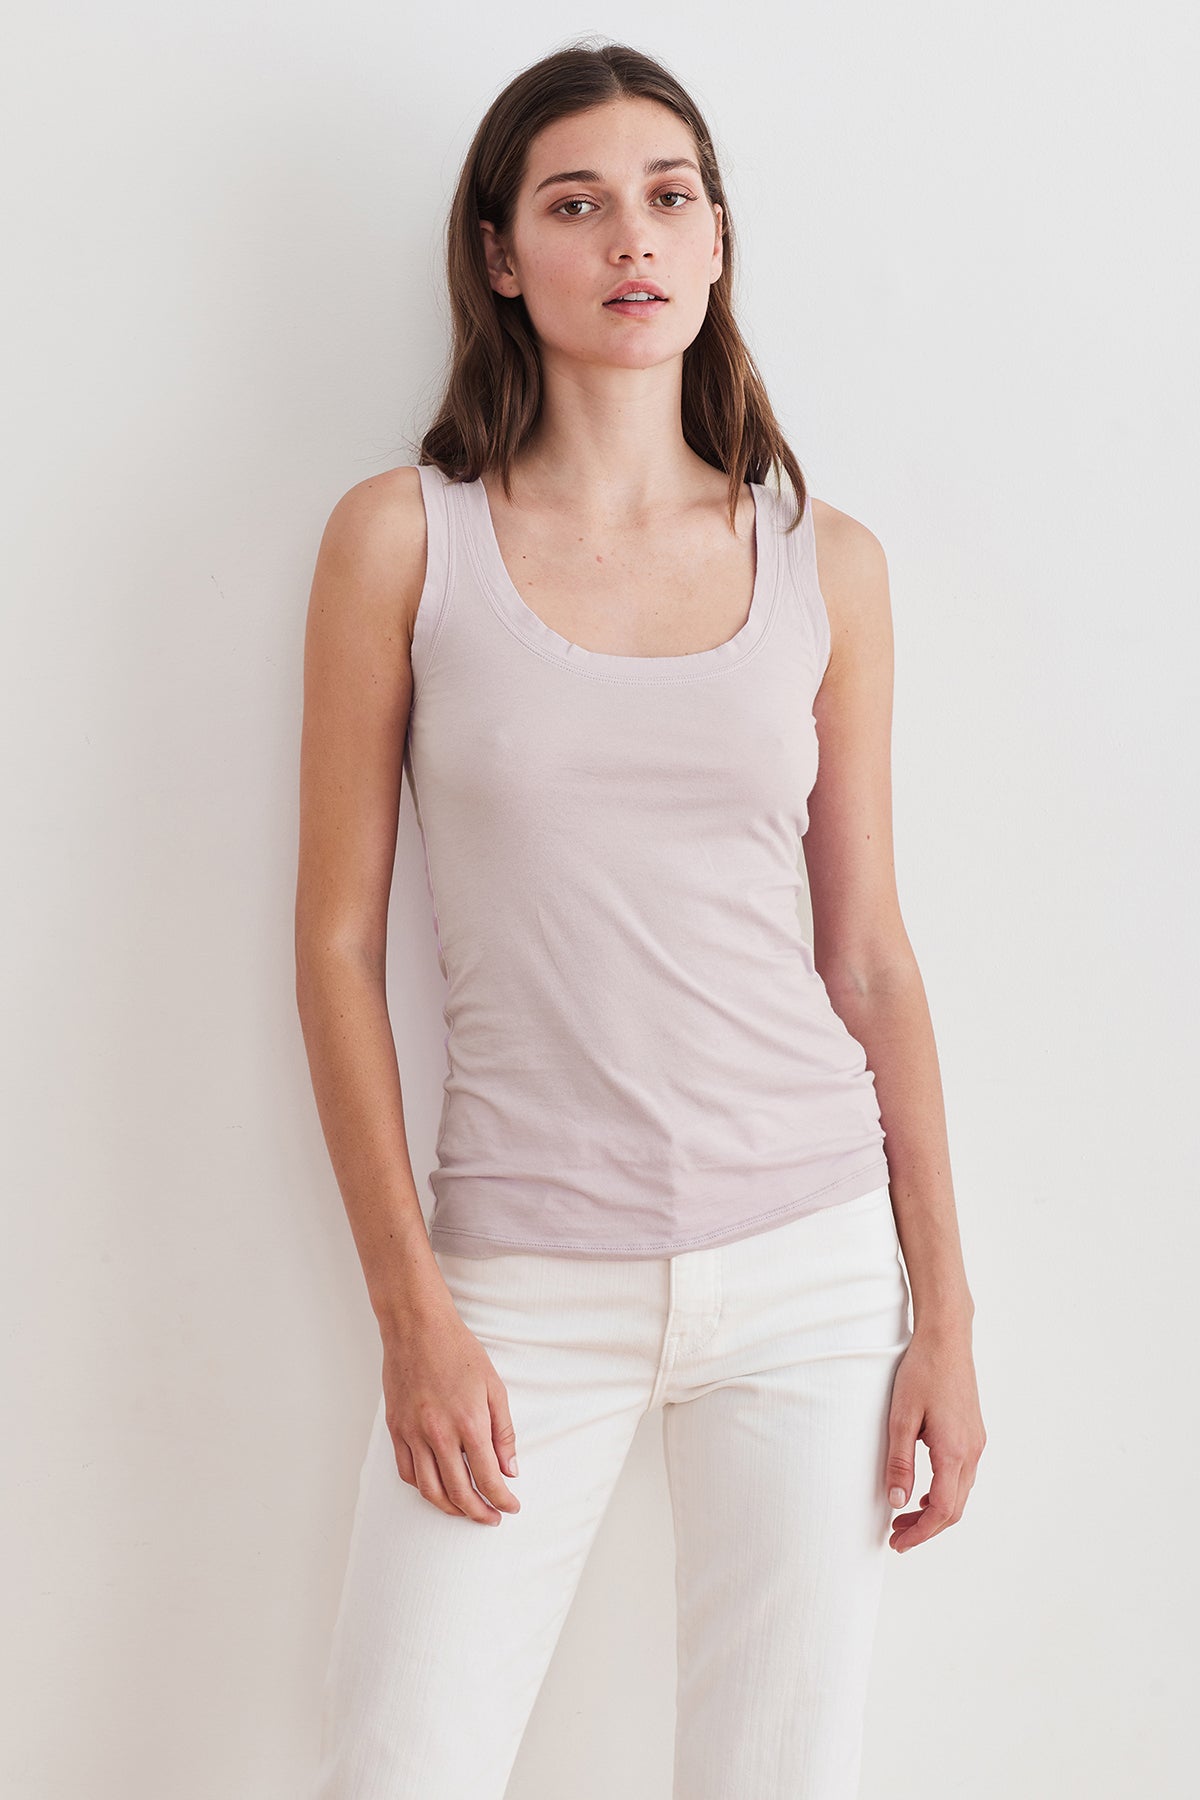 A woman in a Velvet by Graham & Spencer MOSSY GAUZY WHISPER FITTED TANK, paired with white jeans, embracing the back to basics trend in her minimalist outfit.-23854475149505